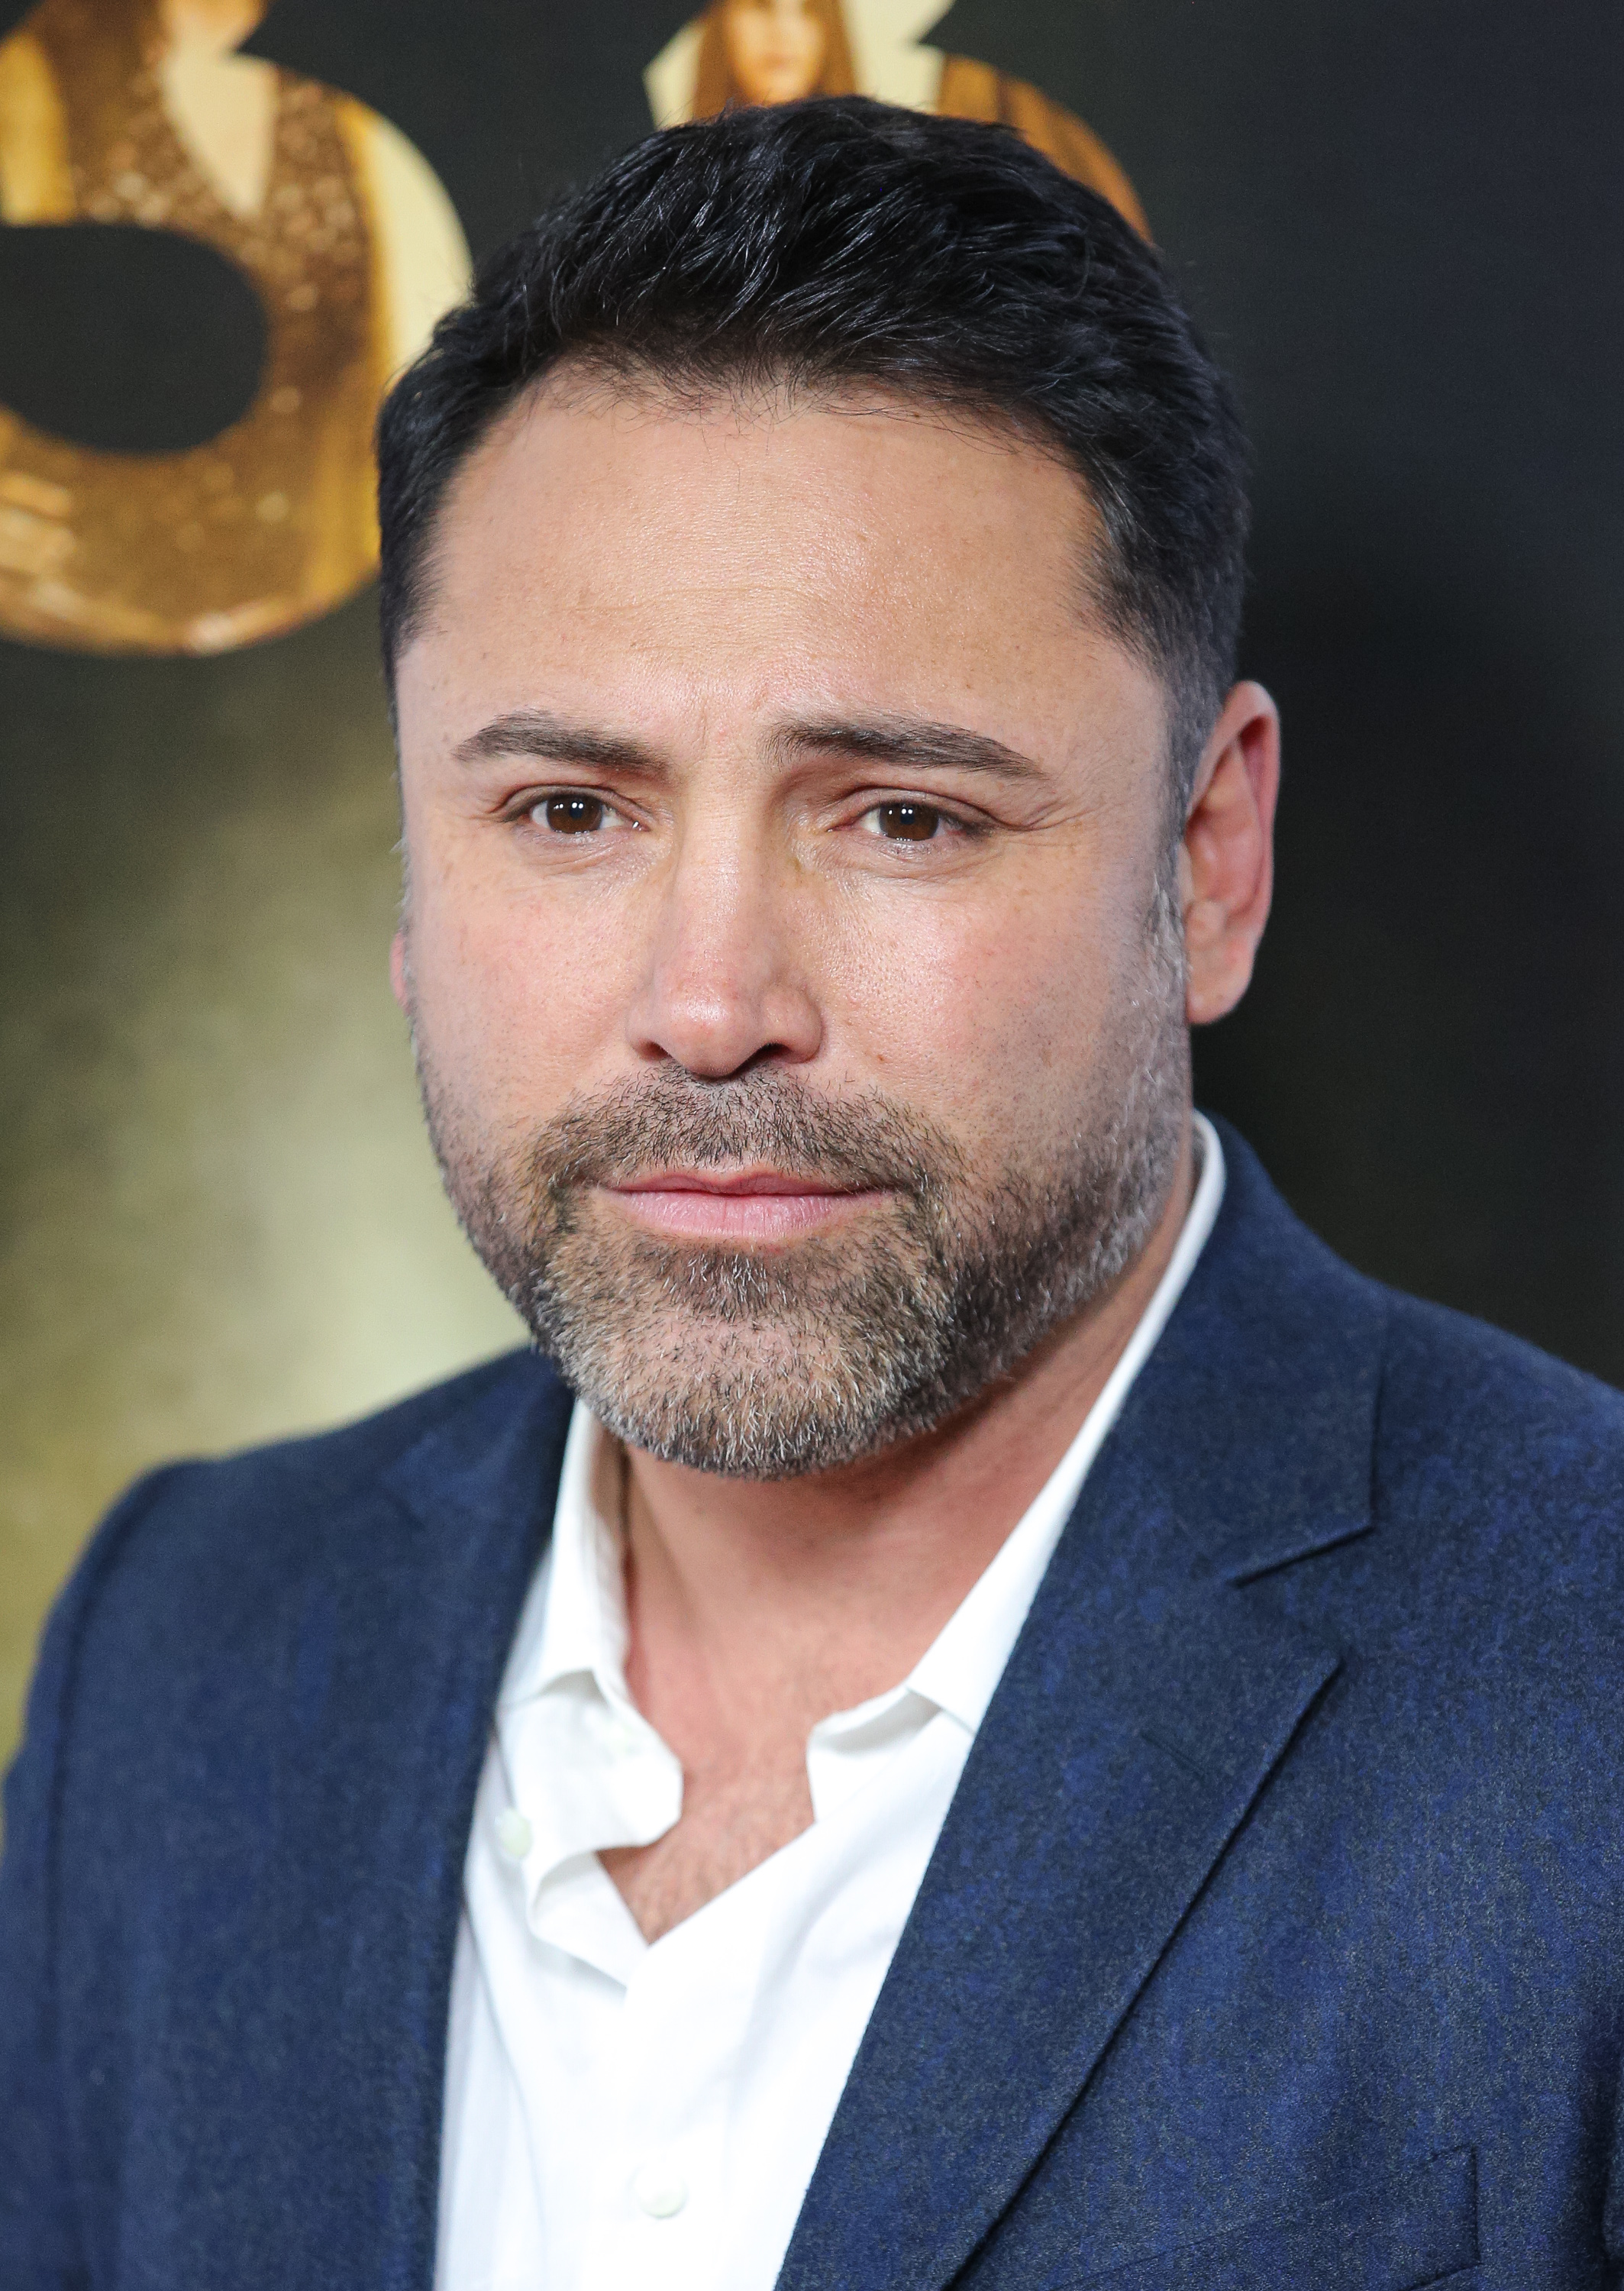 Former professional boxer Oscar De La Hoya attends the Centerpiece Gala premiere of Alcon Entertainment's 'The 33' at TCL Chinese Theatre on November 9, 2015 in Hollywood, California. (Imeh Akpanudosen—Getty Images)